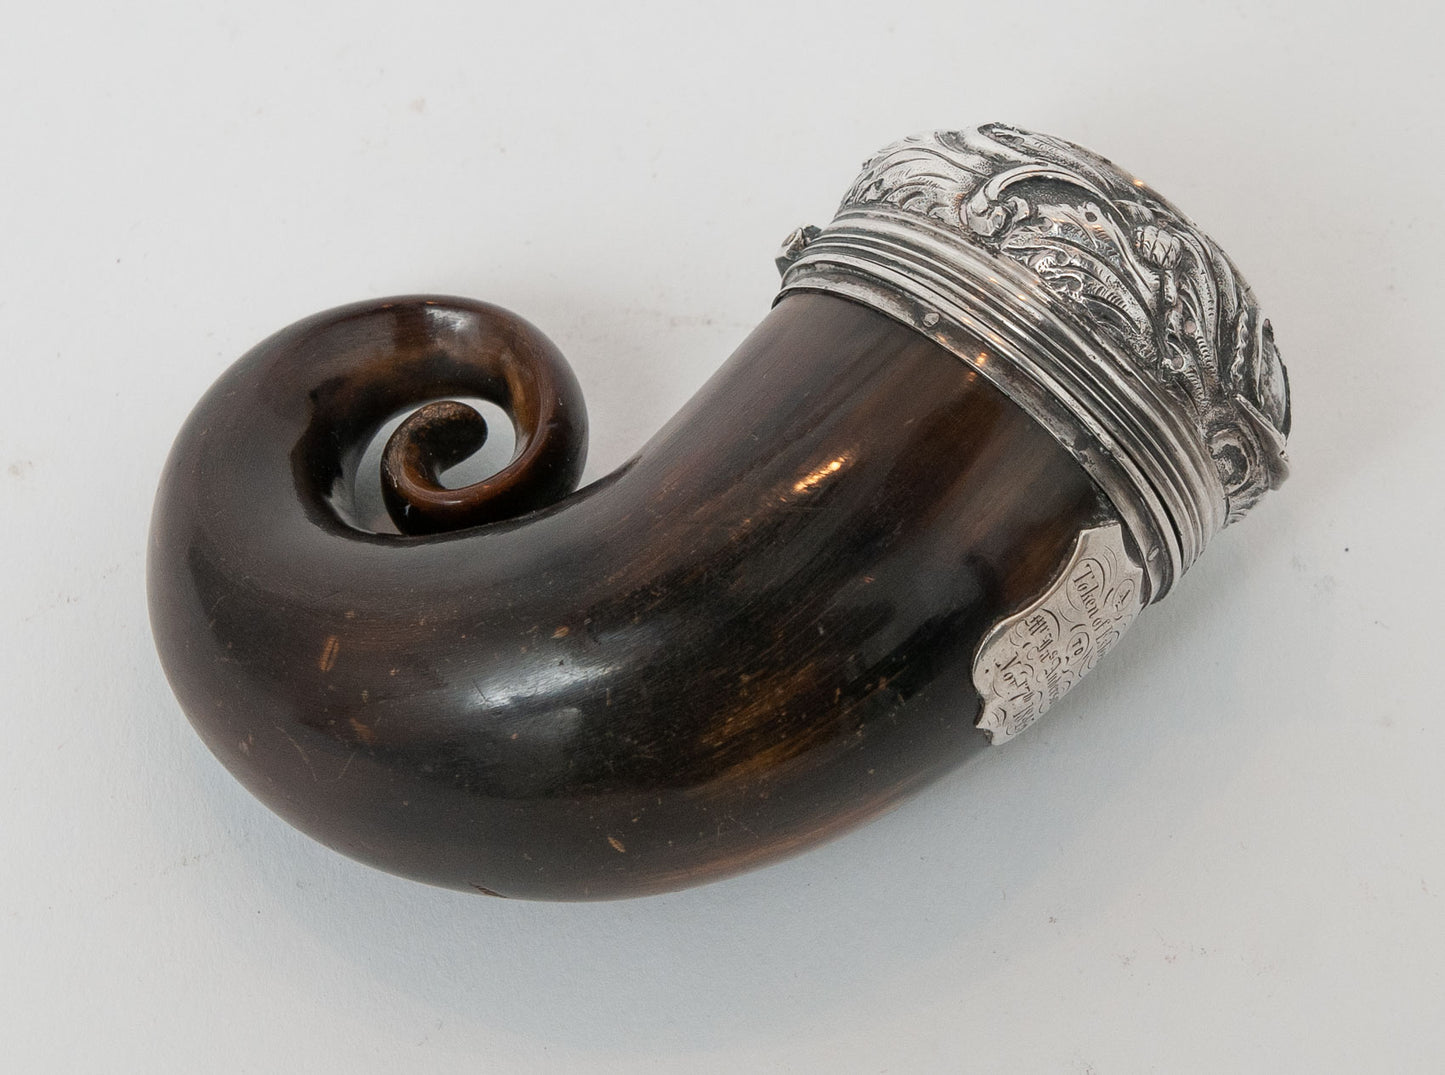 Antique Scottish Rams Horn Snuff Mull Box with Citrine & Silver Lid & Queen Anne Shilling (Code 1534)